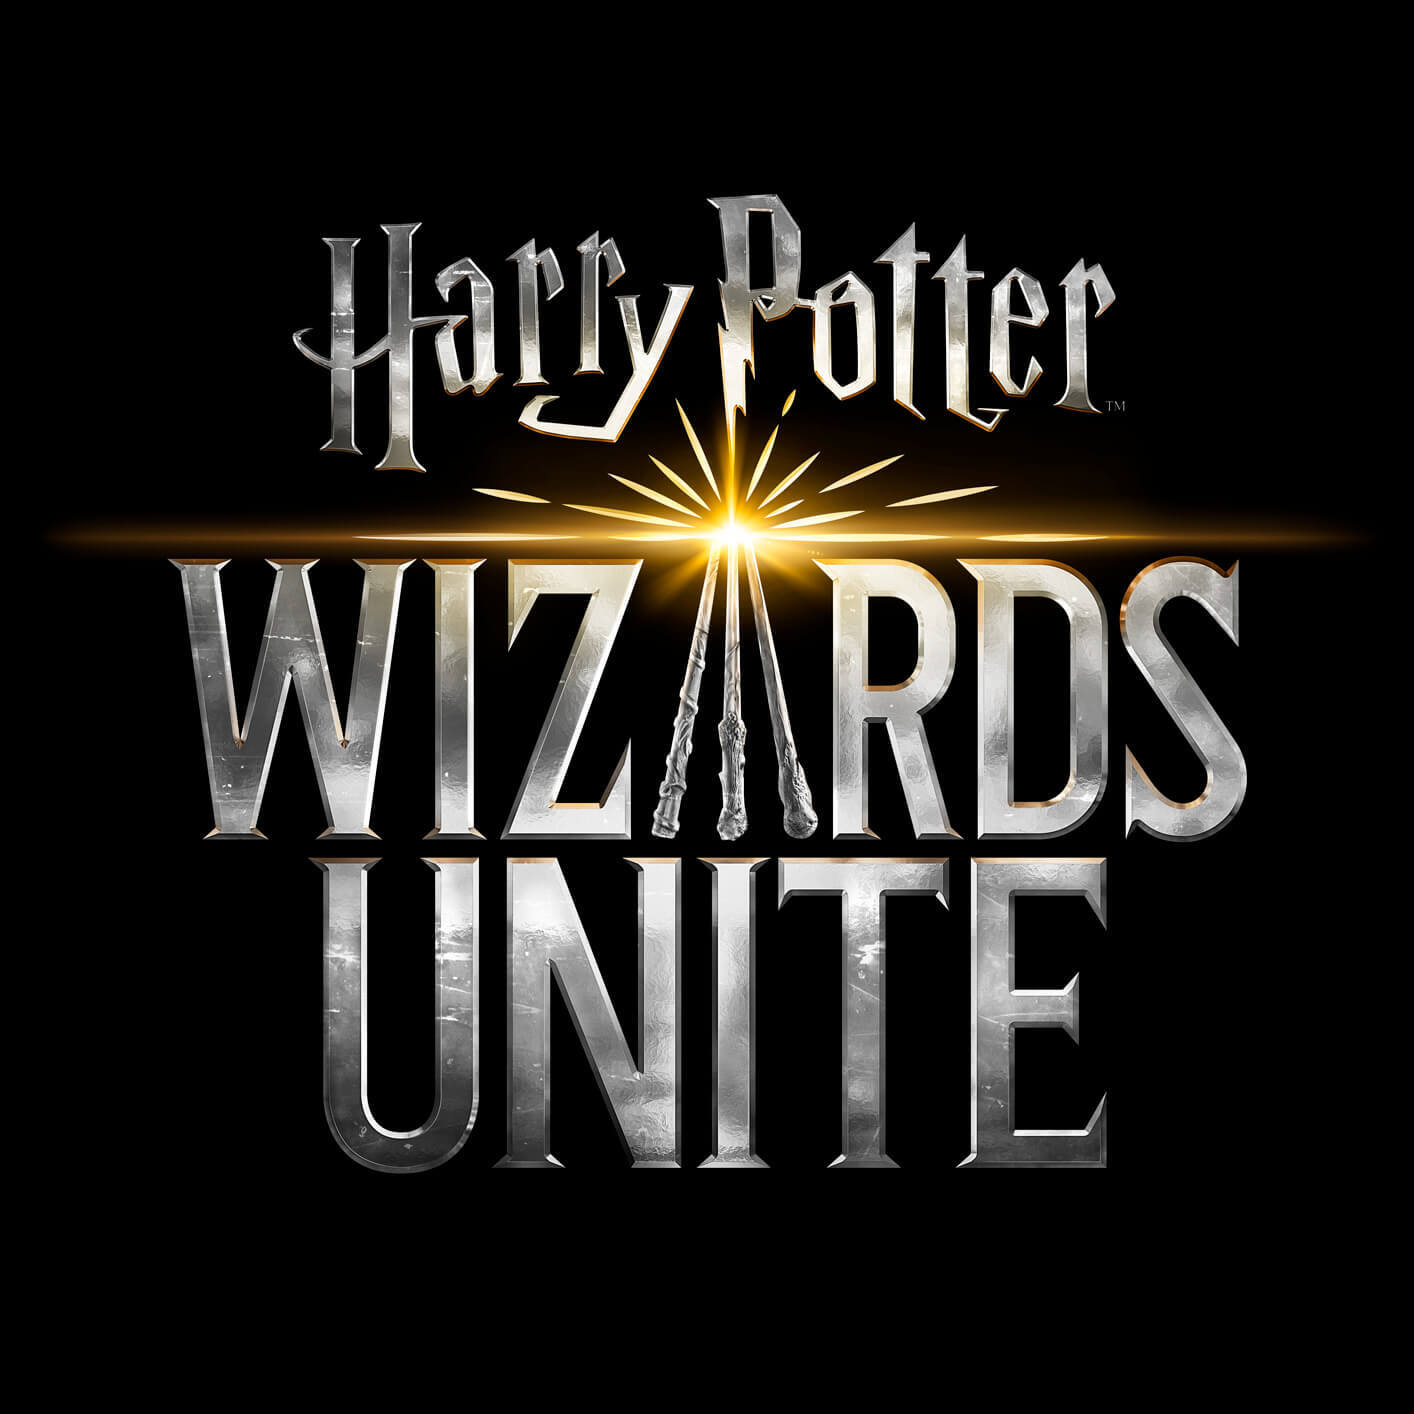 Harry Potter: Wizards Unite game displayed on a smartphone screen